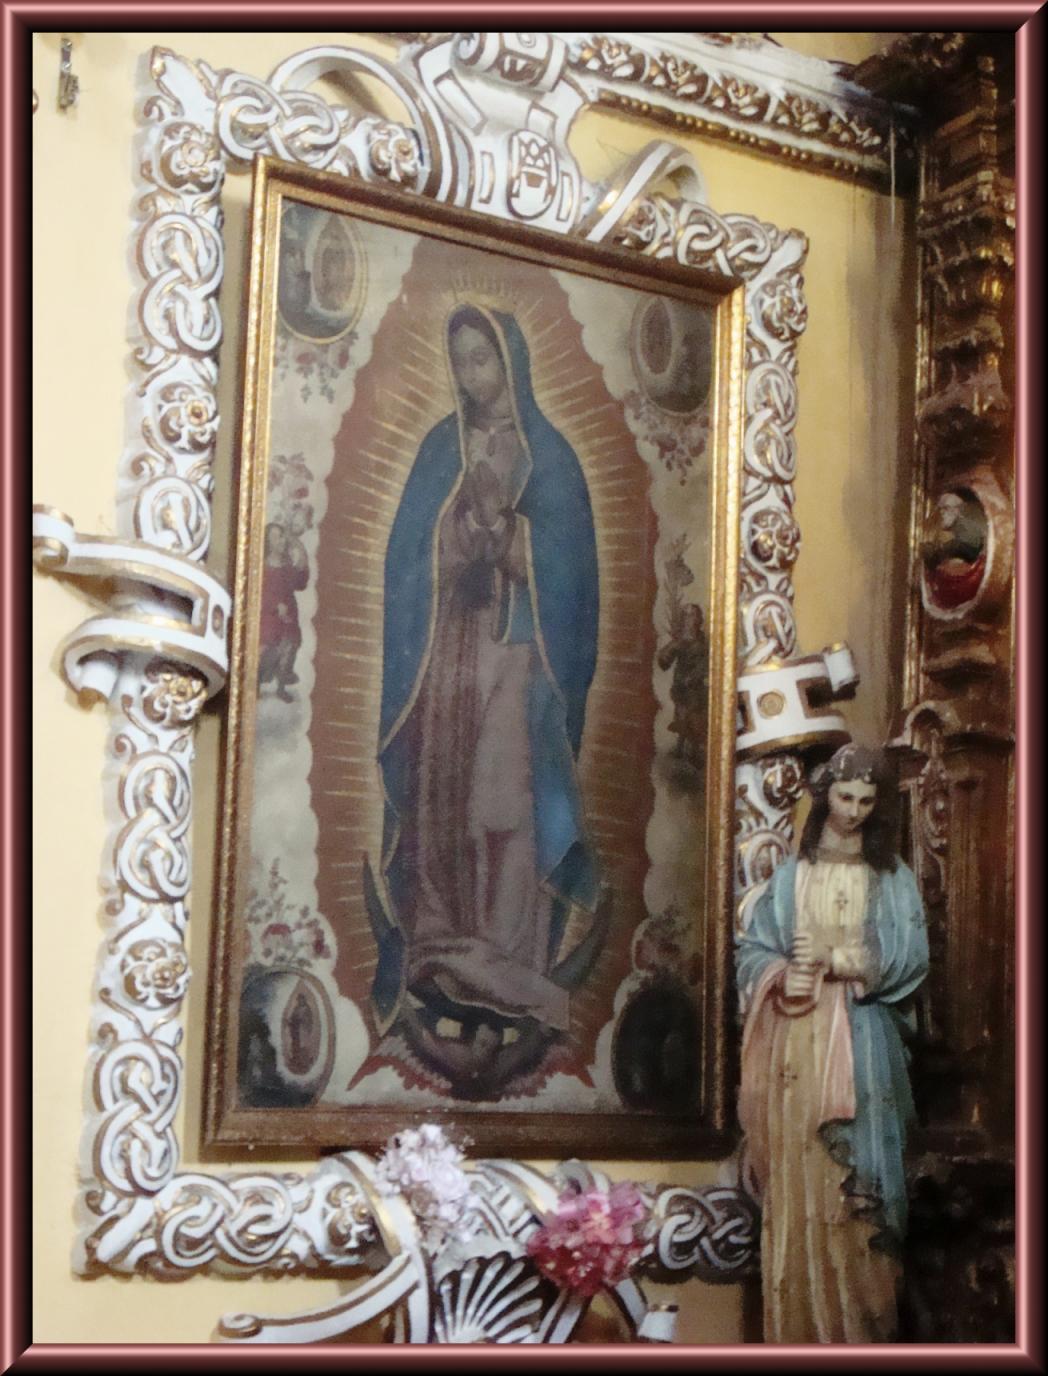 a picture of the virgin mary on a wall in a room